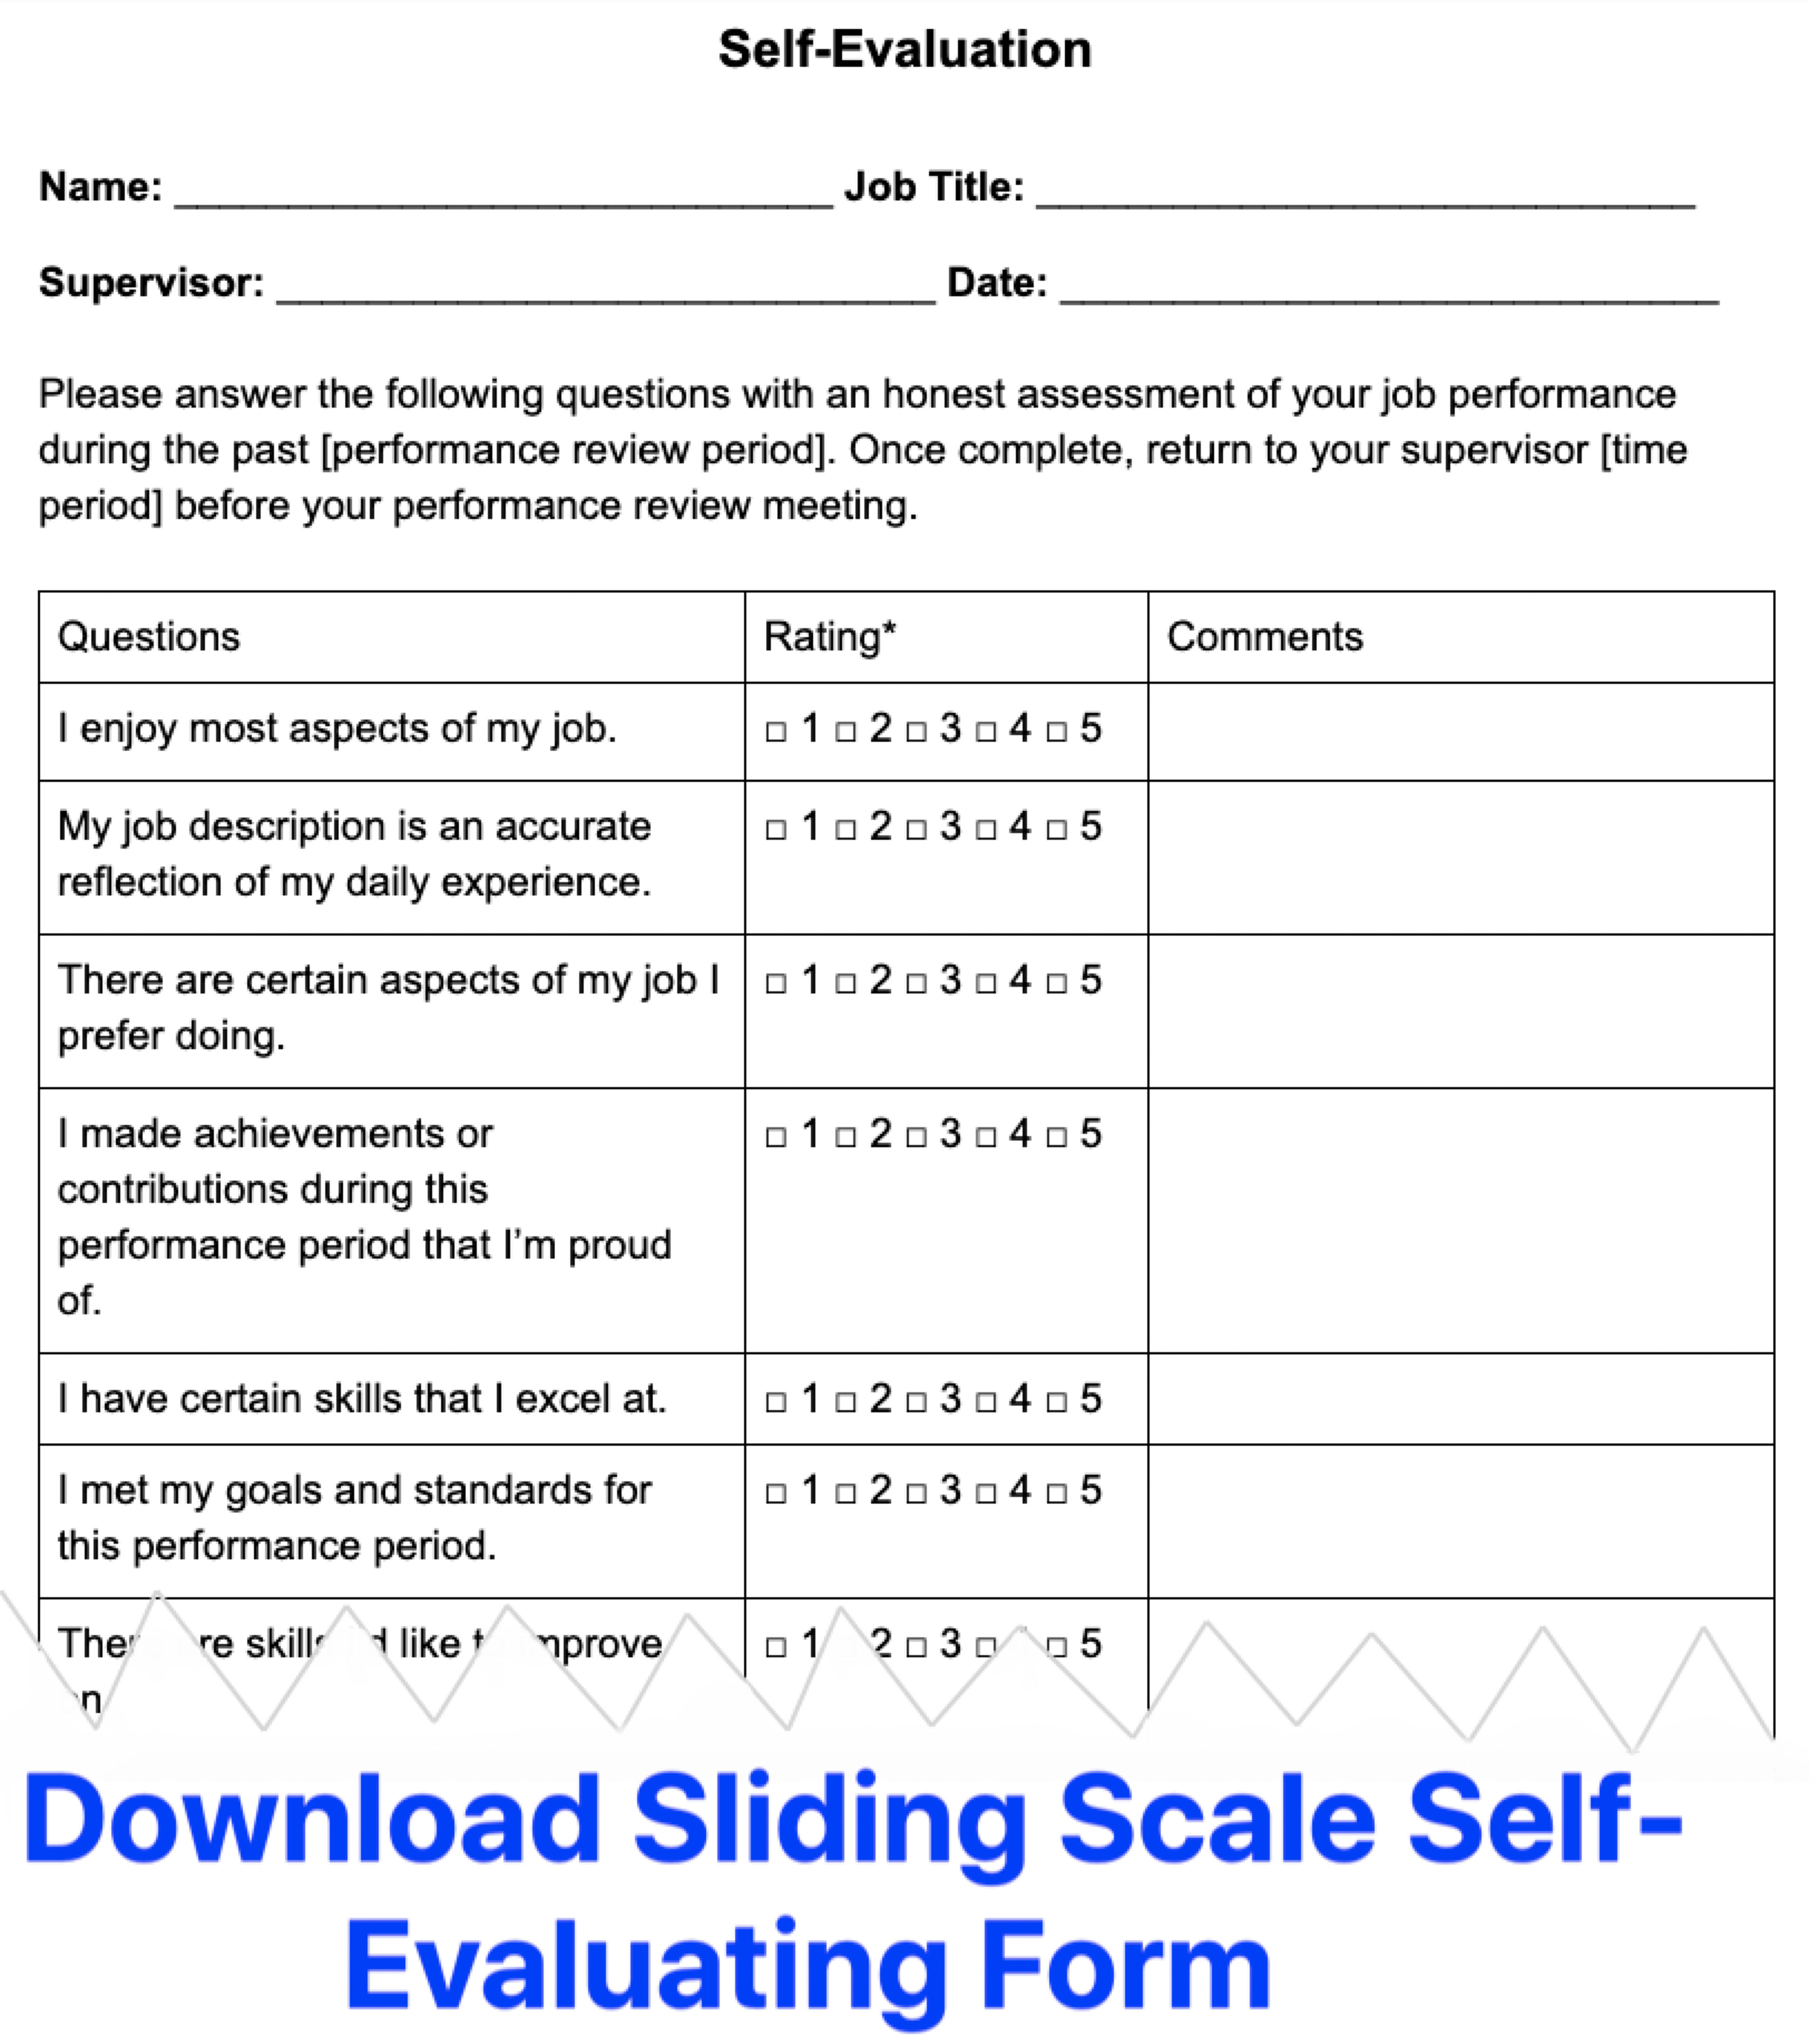 Sliding Scale Self-Evaluations Template